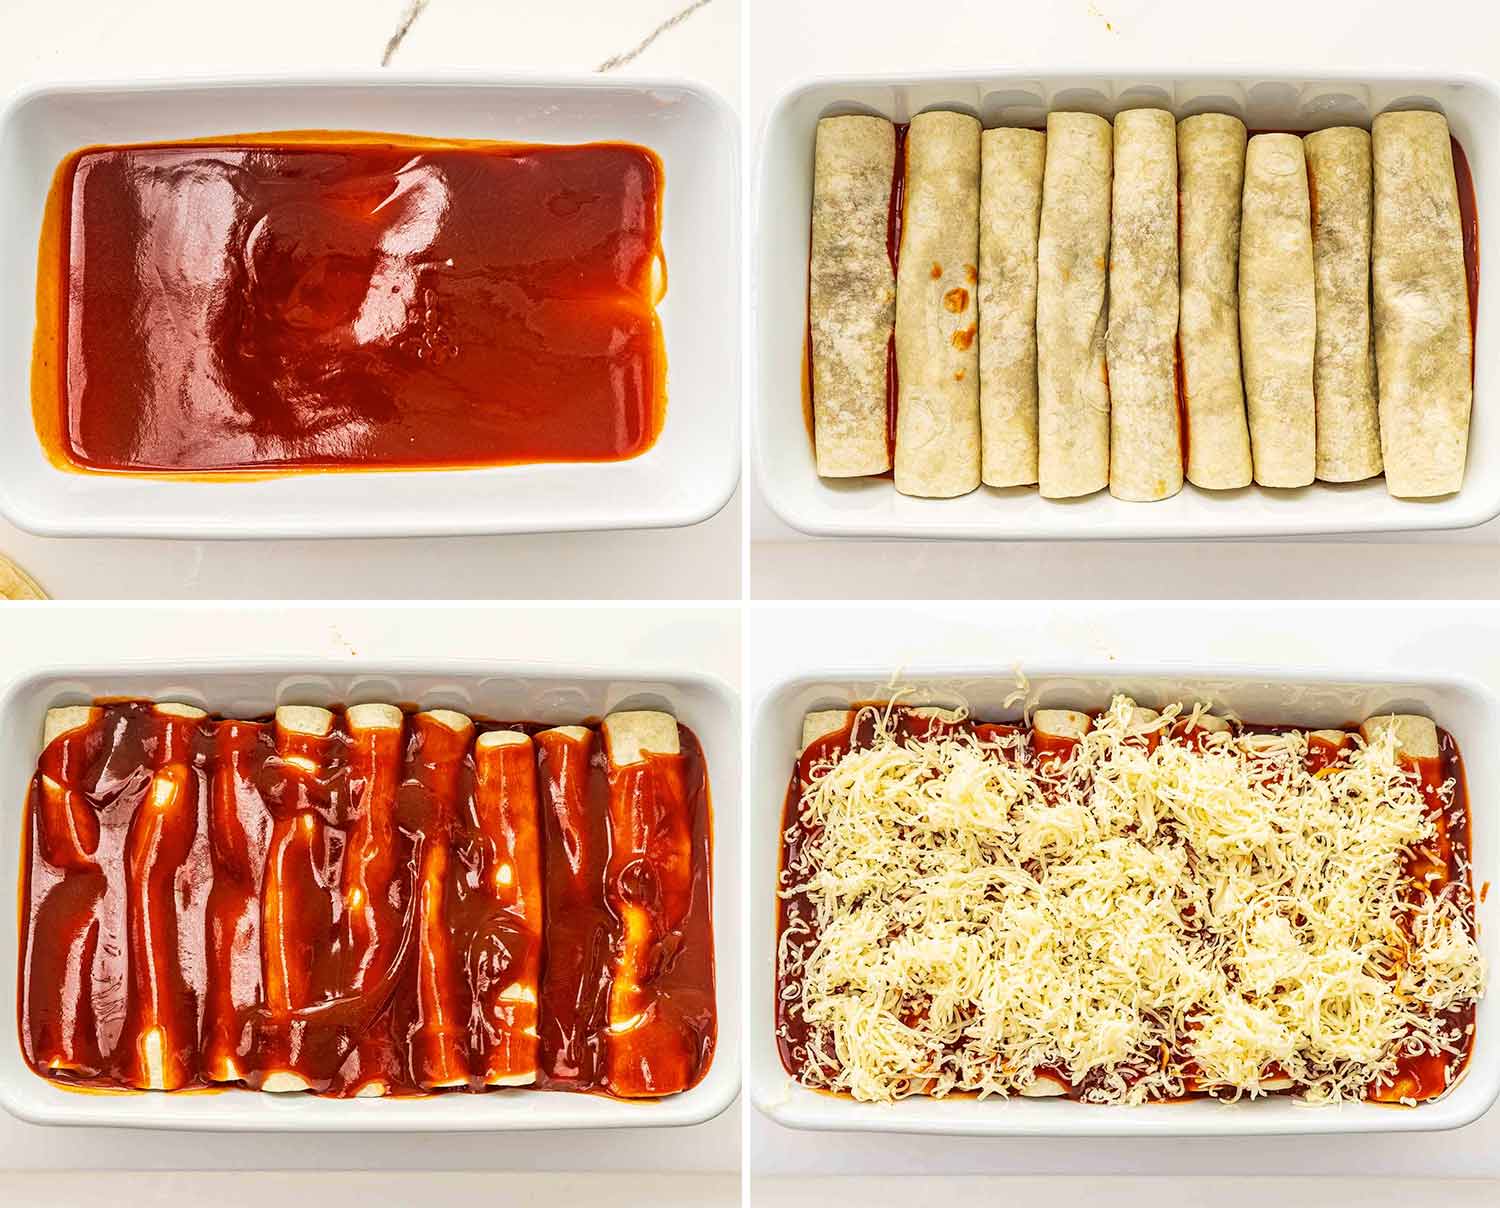 process shots showing how to make beef enchiladas.